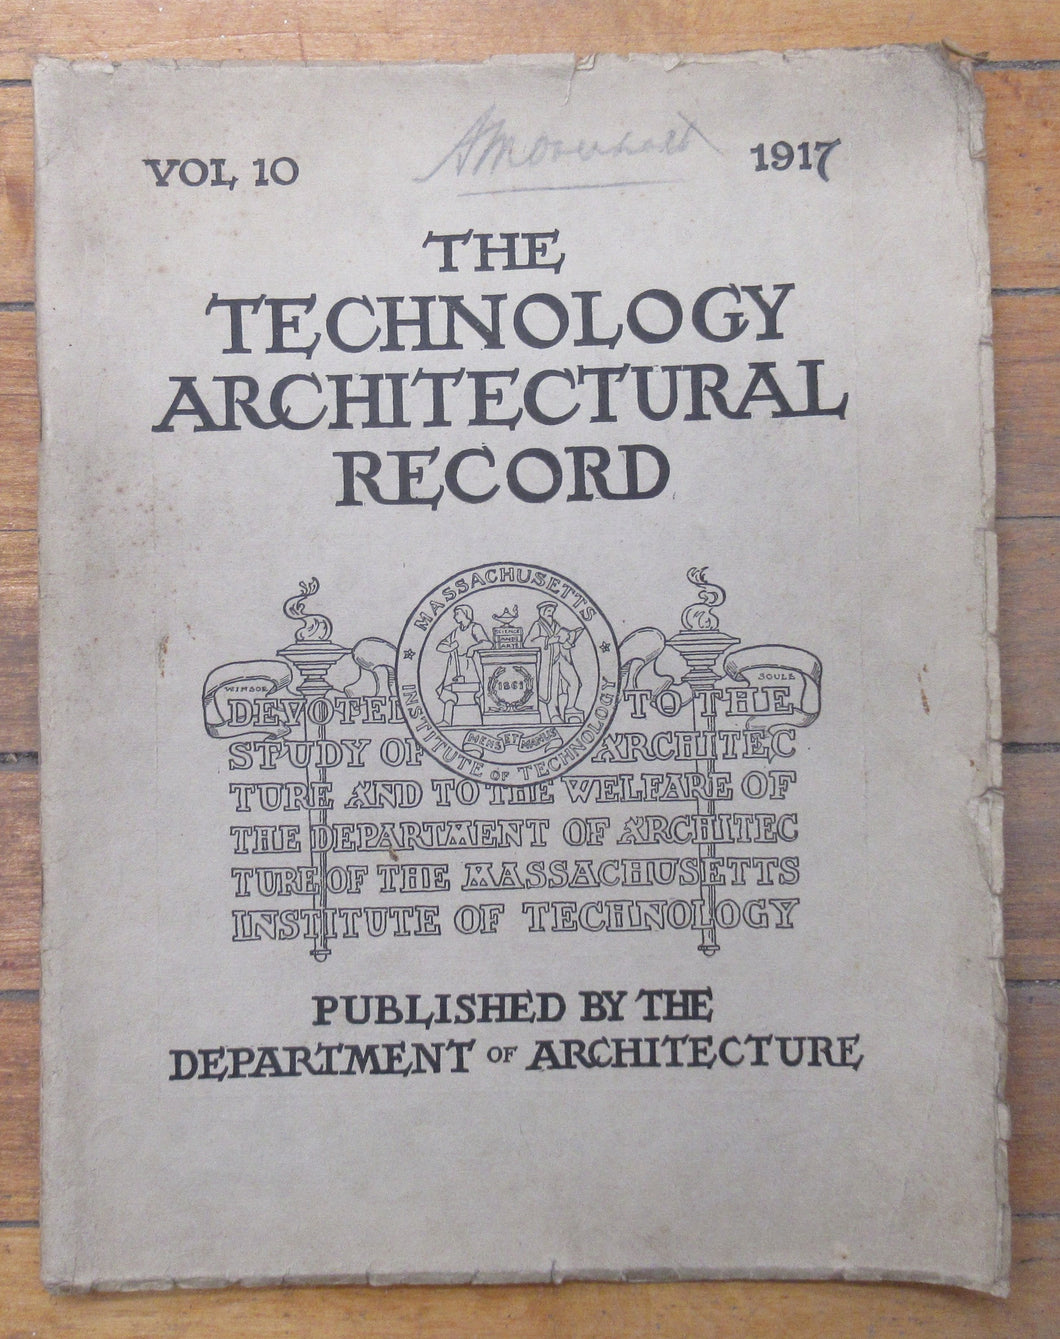 The Technology Architectural Record, 1917